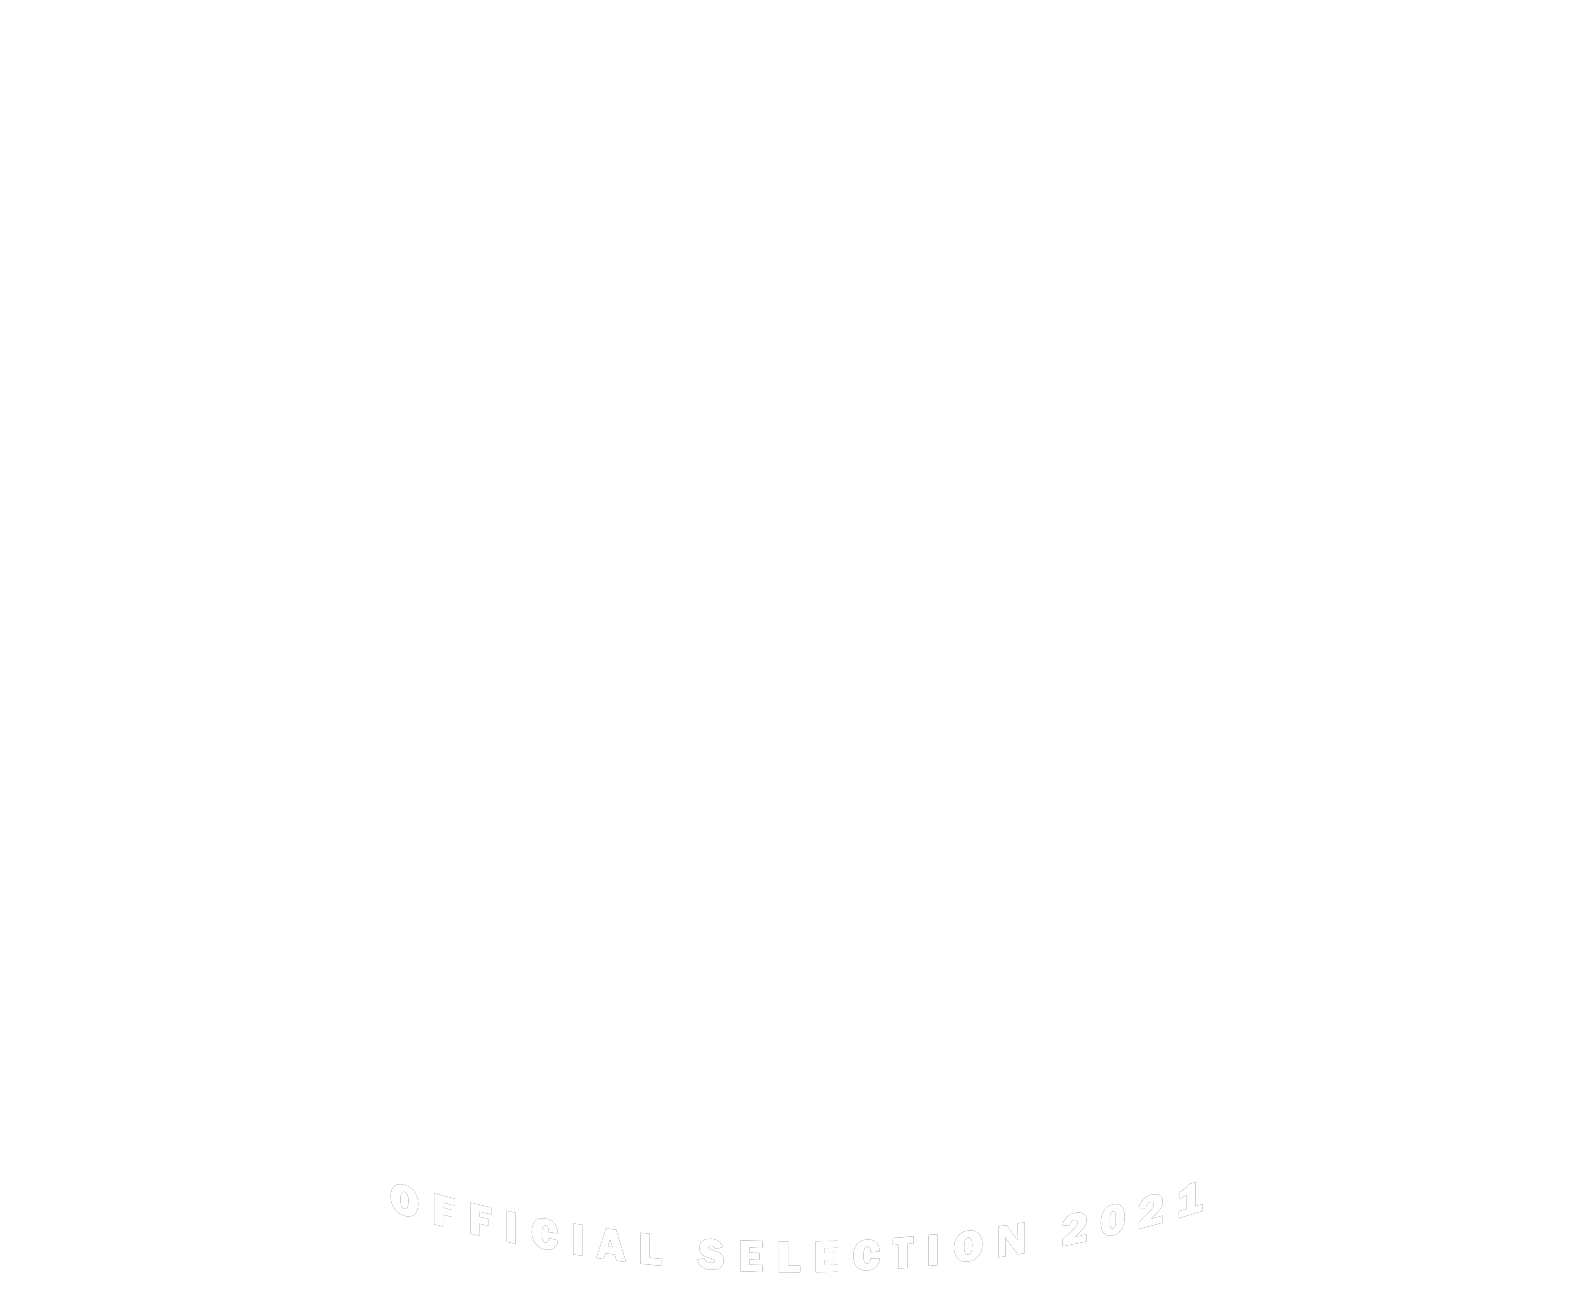 PIFF-Official Selection 2021 (white) copy.png